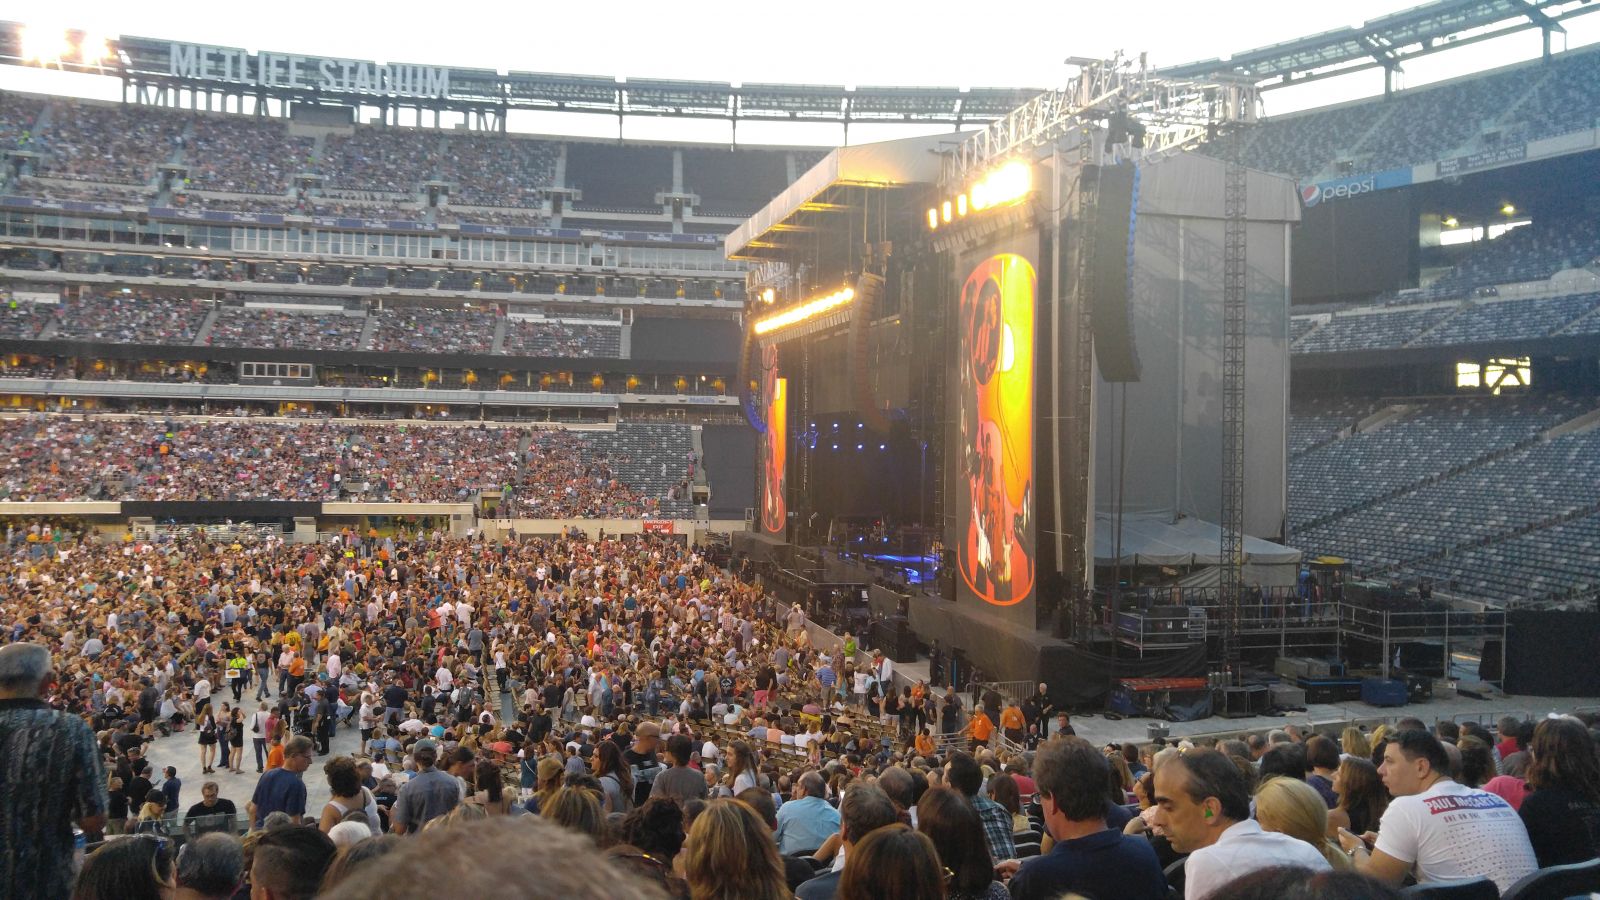 section 111c, row 22 seat view  for concert - metlife stadium